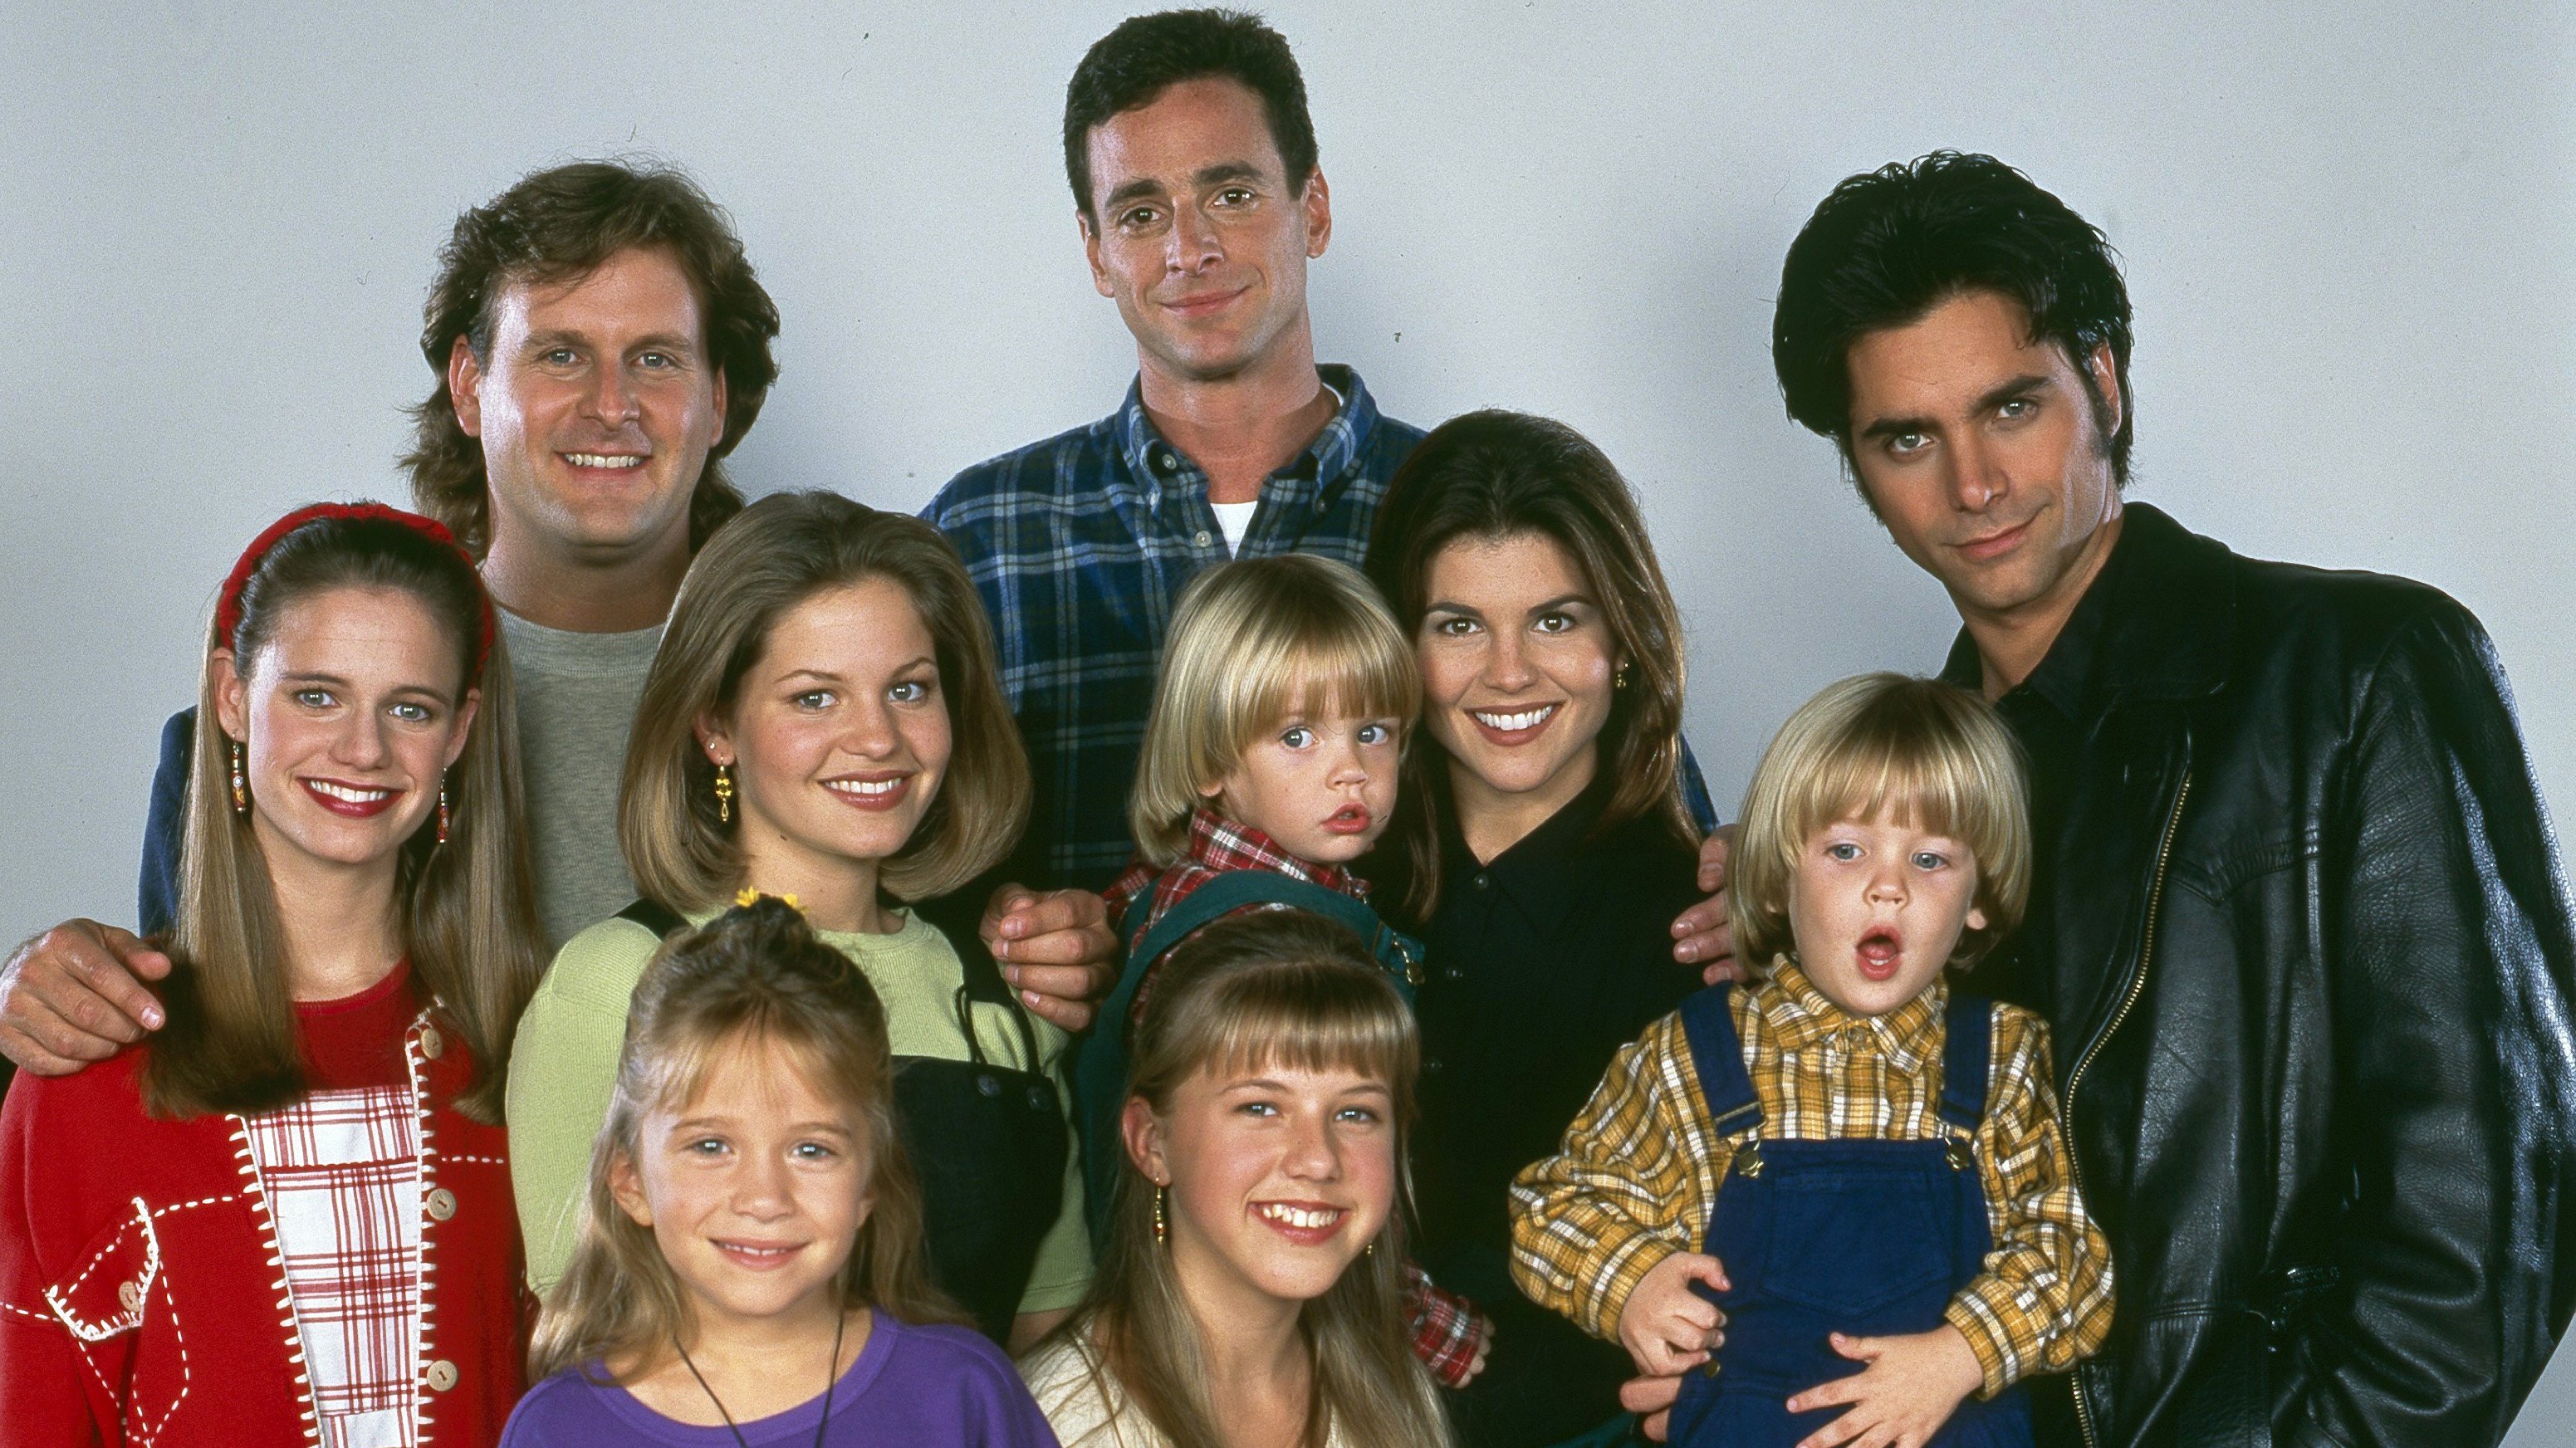 FOX NEWS 'Full House' cast Where are they now? Global Time News